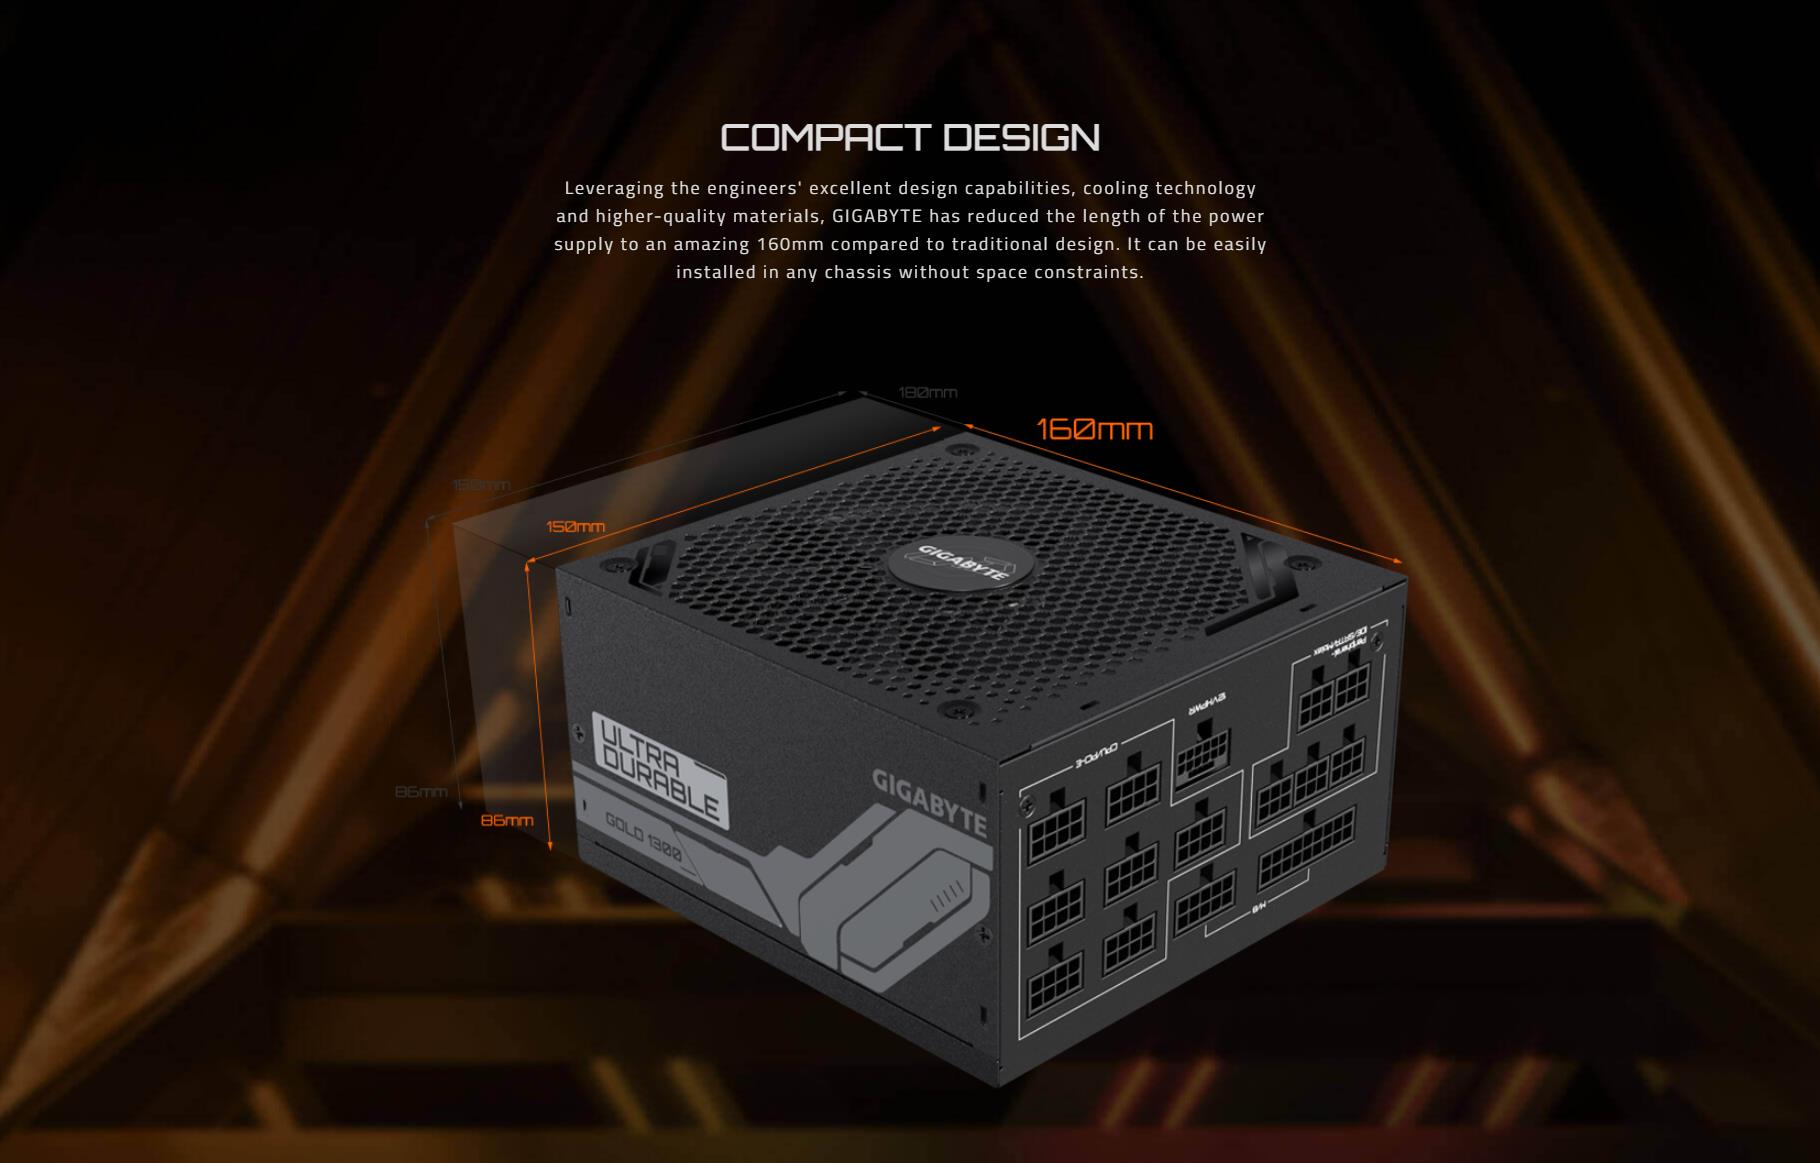 A large marketing image providing additional information about the product Gigabyte UD1300GM PG5 1300W Gold PCIe 5.0 Modular PSU - Additional alt info not provided